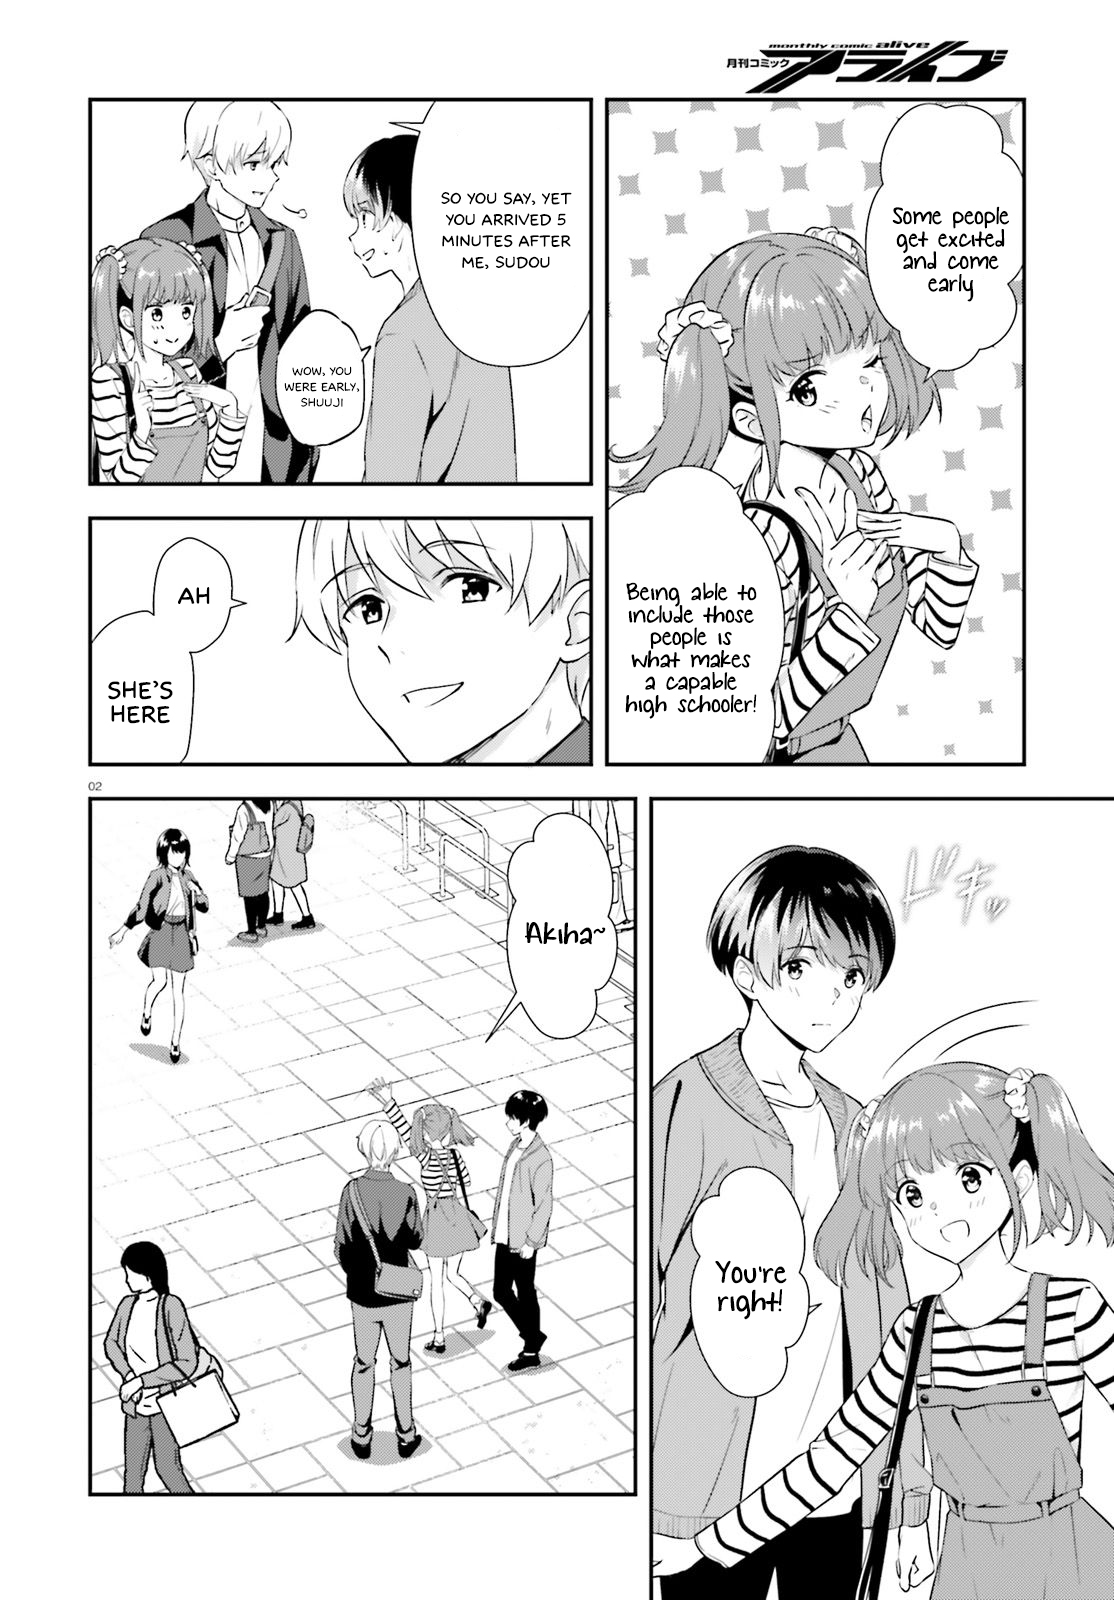 Bizarre Love Triangle Vol.2 Chapter 10: The Weekend Together - Picture 3